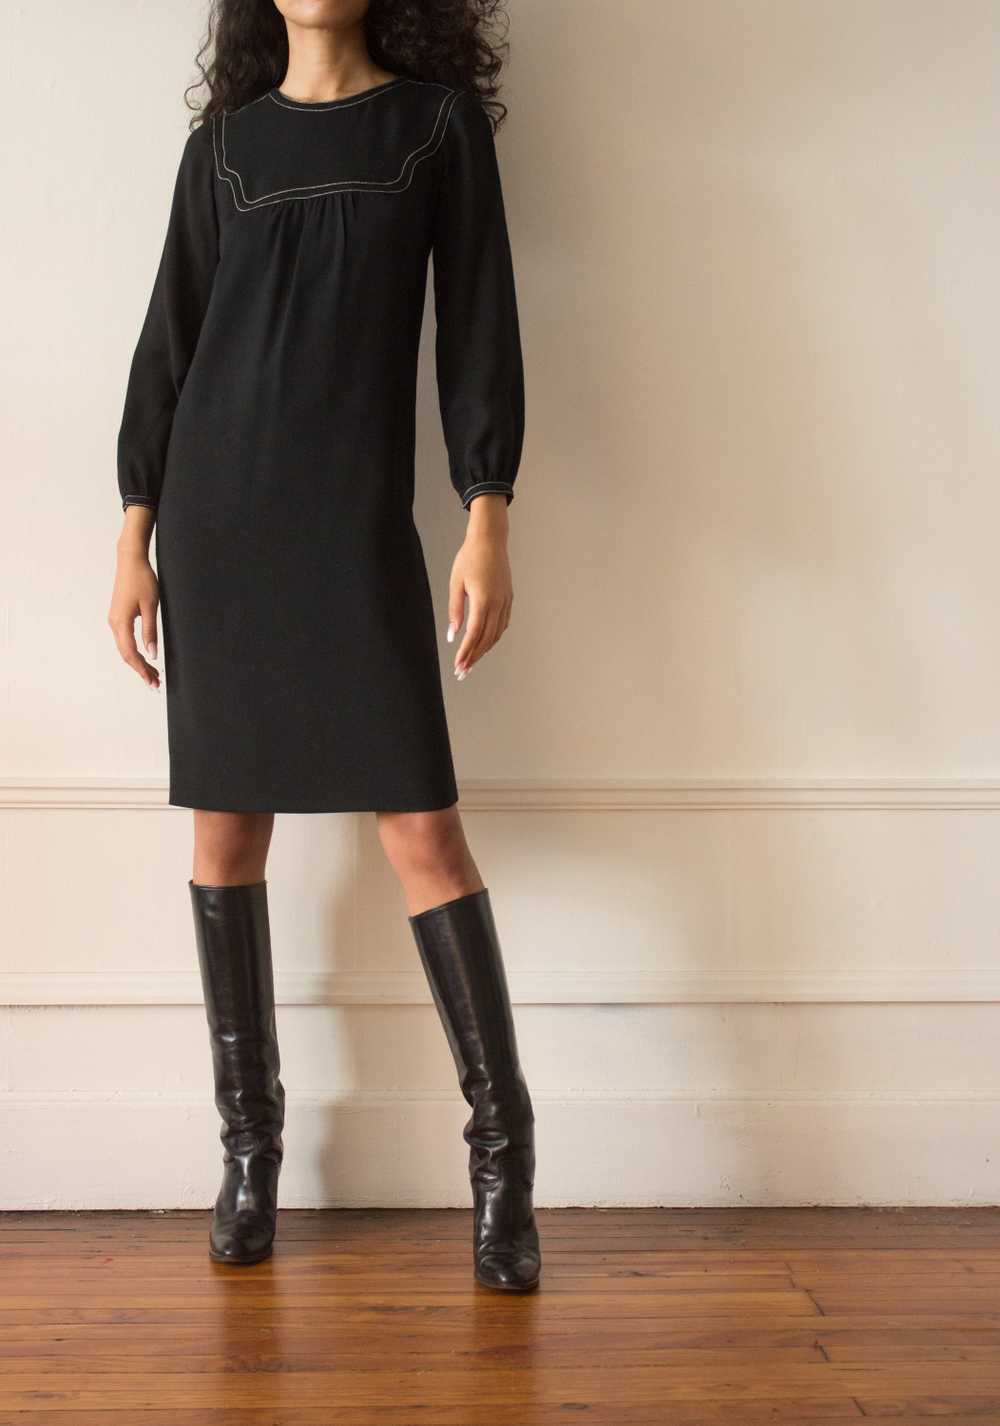 1960s Black Shift Dress with Contrast Stitching - image 4